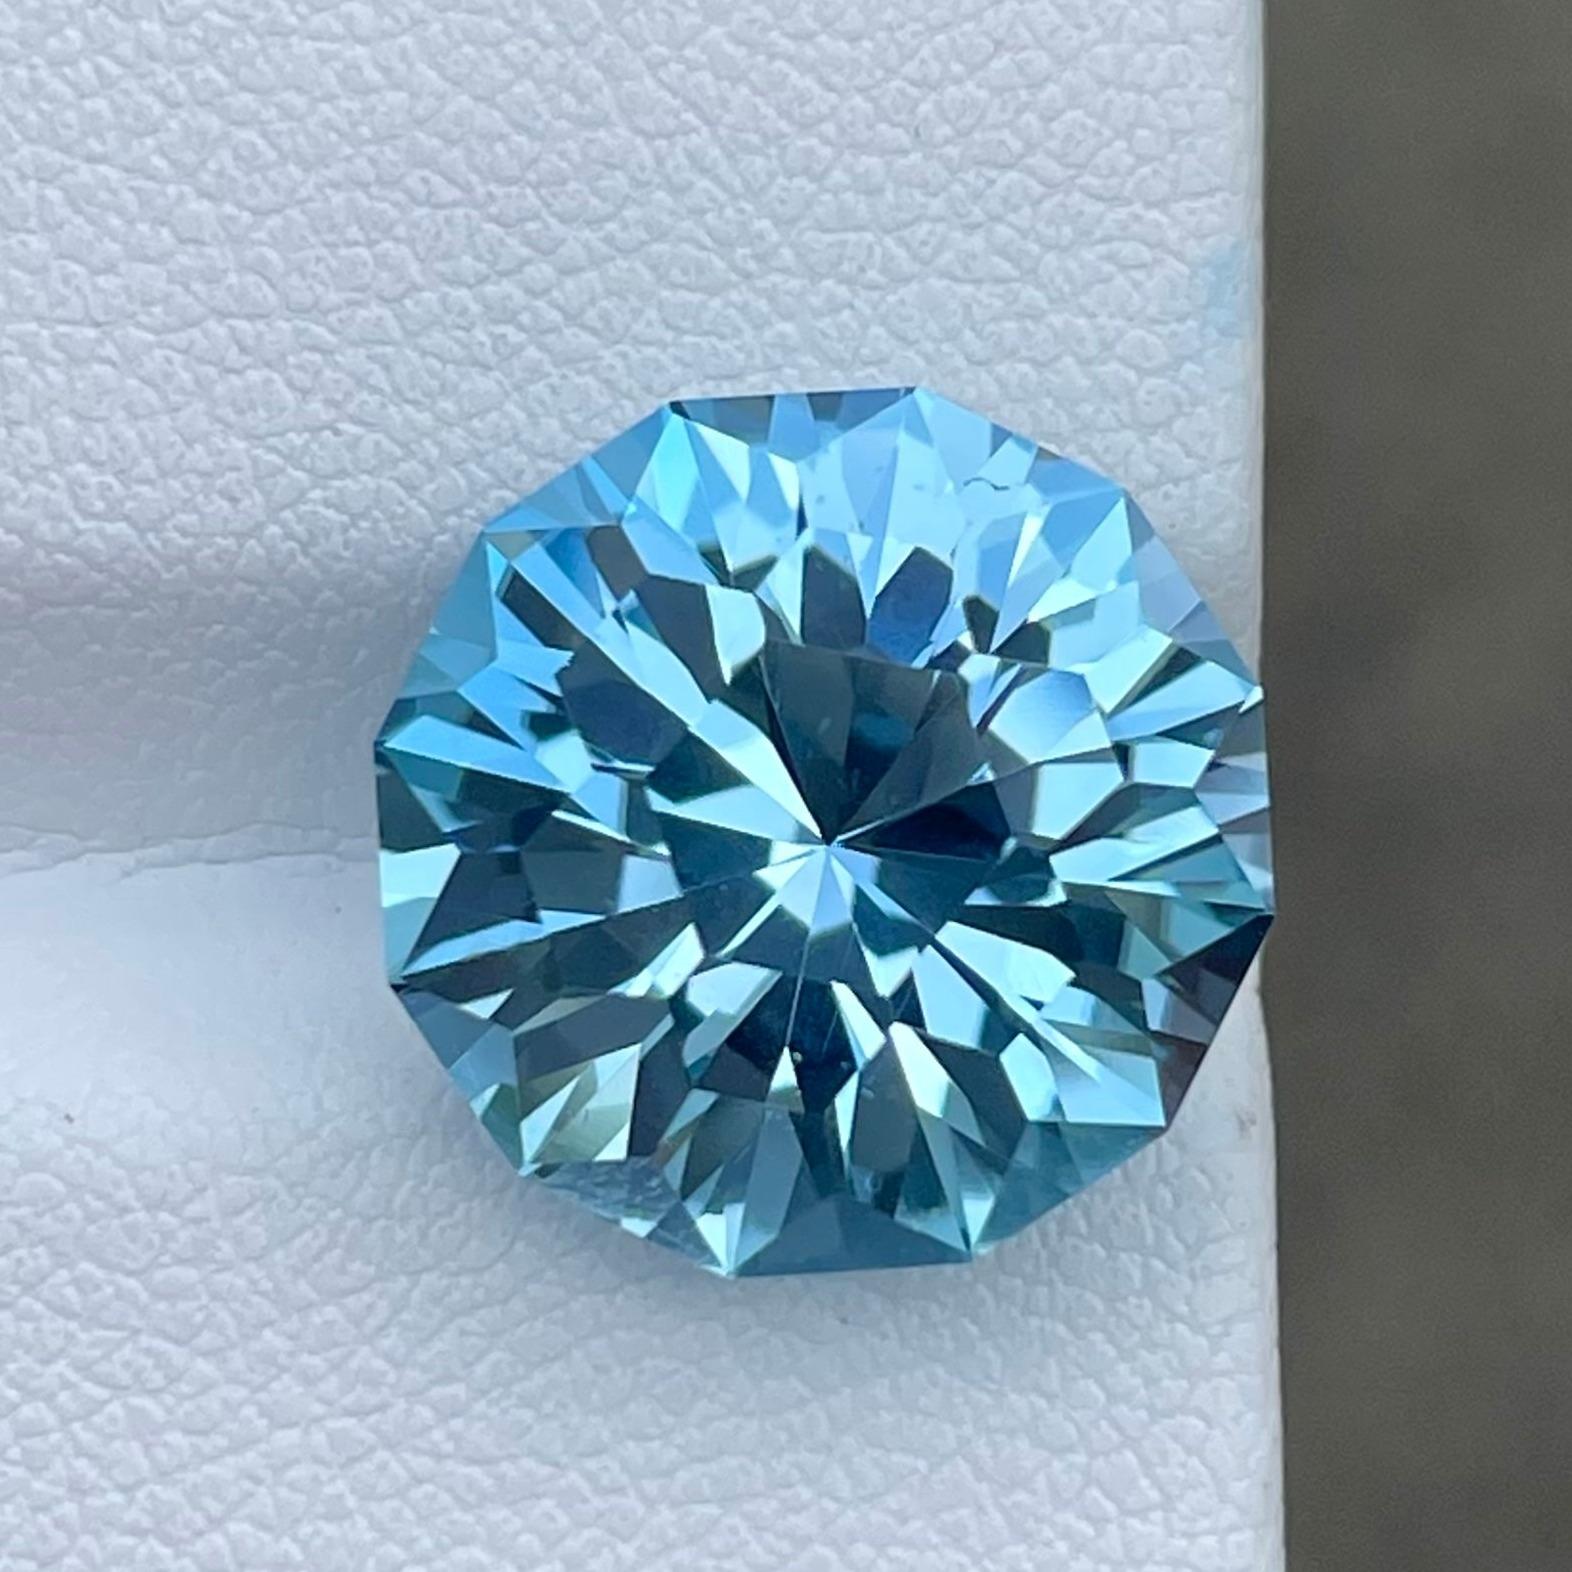 Weight 12.10 carats 
Dimensions 14.1 x 14.0 x 9.72 mm
Treatment Heated 
Clarity Loupe Clean
Origin Madagascar 
Shape Round 
Cut Honey-Comb


Discover the Exquisite Beauty of a 12.10 Carat Natural Honey Comb Swiss Blue Topaz Gemstone from Madagascar.